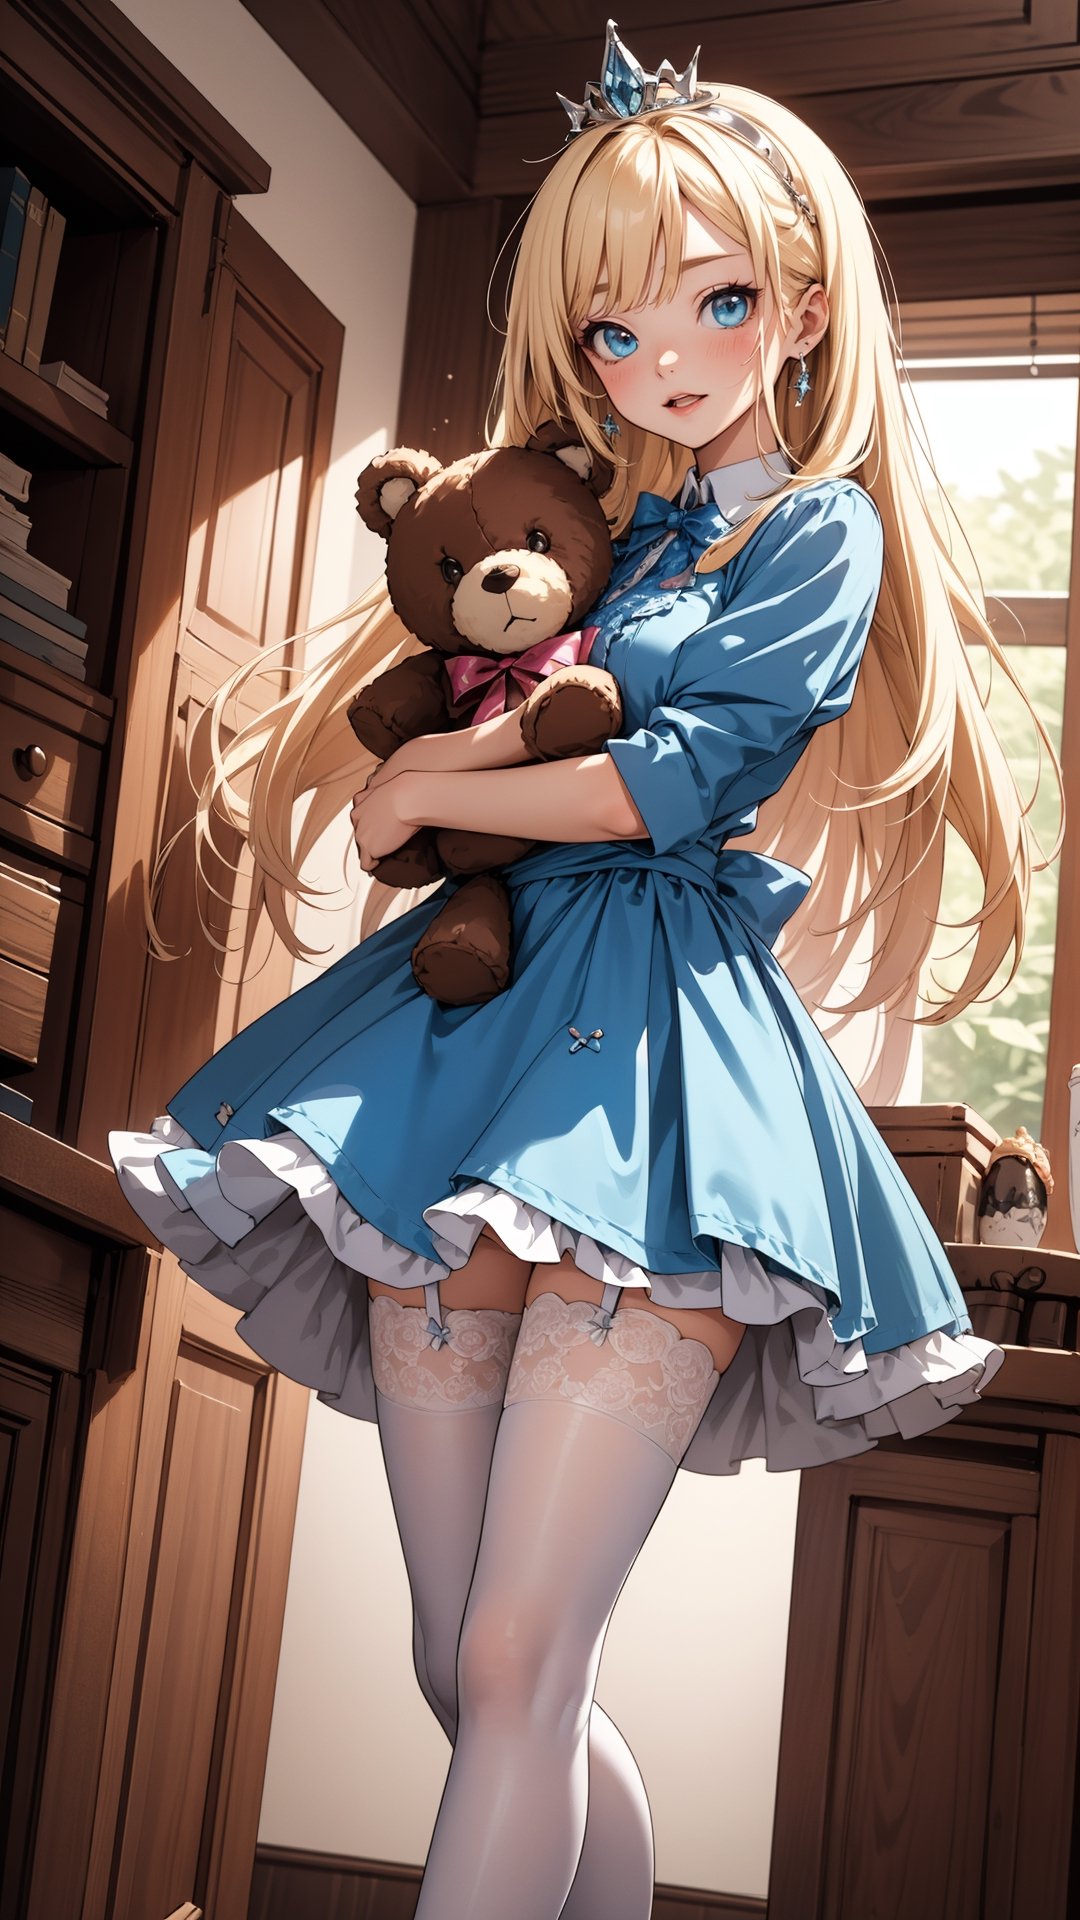 (best quality, masterpiece, illustration, designer, lighting), (extremely detailed CG 8k wallpaper unit), (detailed and expressive eyes), detailed particles, beautiful lighting, a cute girl, long blonde hair, wearing a teddy bear tiara, (Hug teddy bear doll),donning a beautiful blue and white dress with ruffles and lace, sheer pink stockings, transparent aquamarine crystal shoes, bows around her waist (Alice in Wonderland), butterflies around, (Pixiv anime style), (Wit studios),(manga style), scared,In the dark corner of the room,little_cute_girl,midjourney